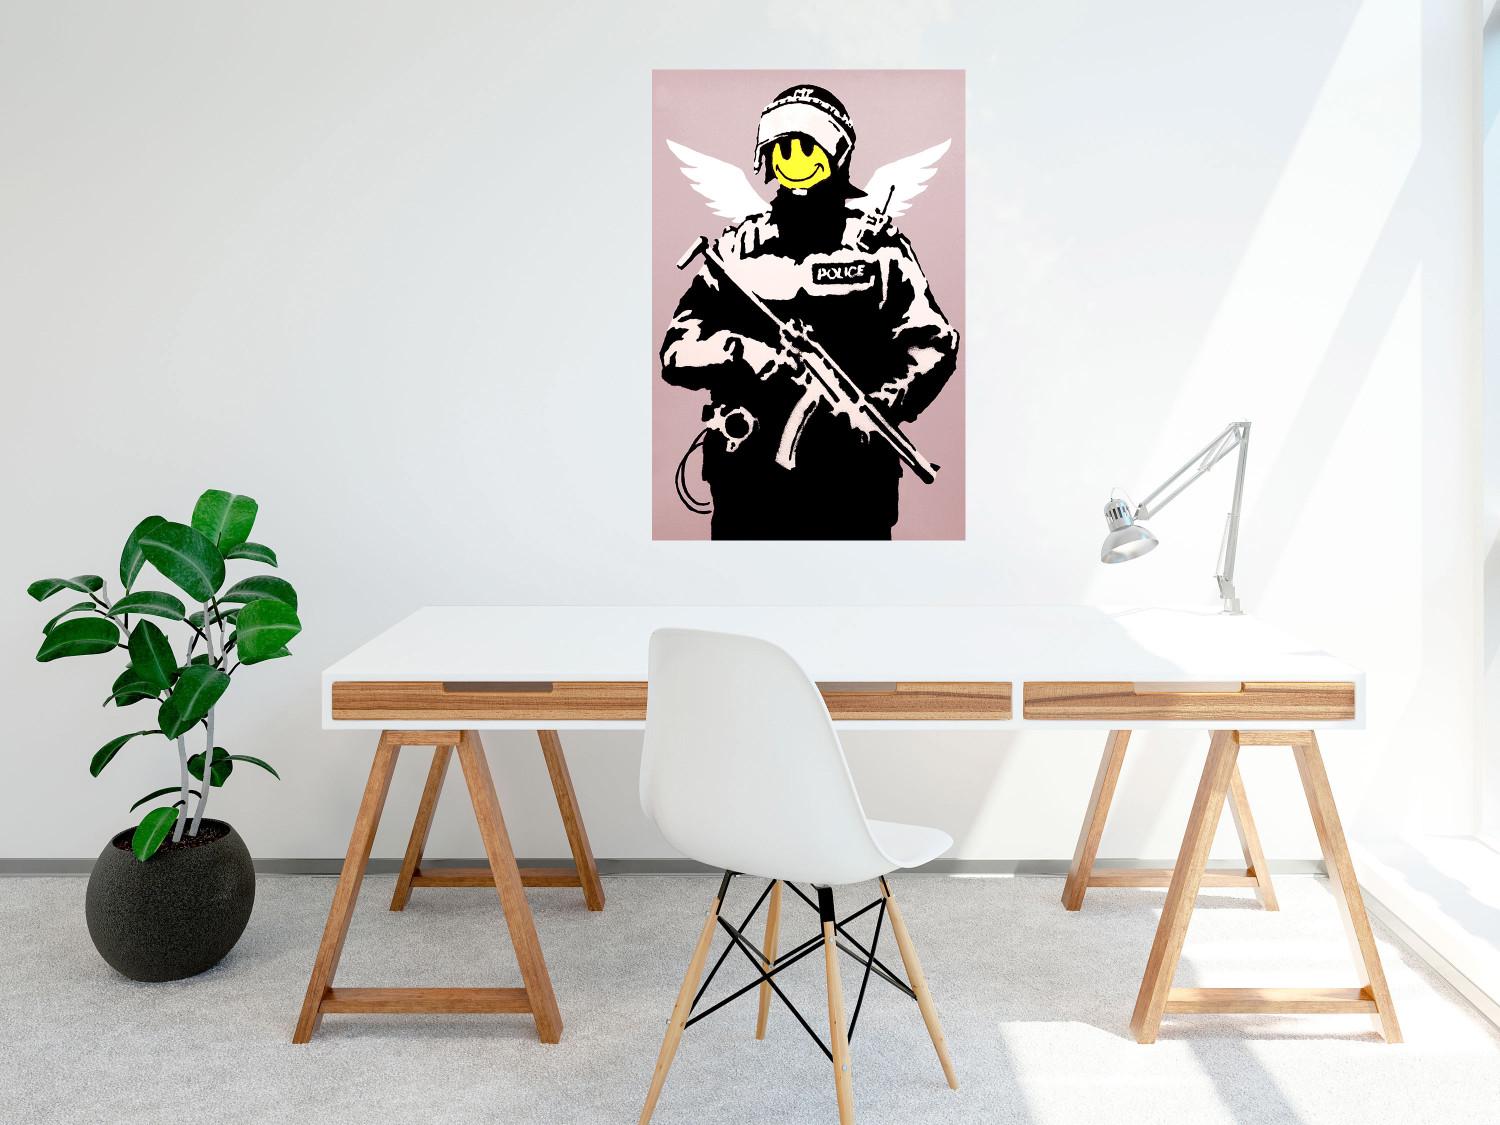 Poster Policeman - man with a yellow face and wings in Banksy style